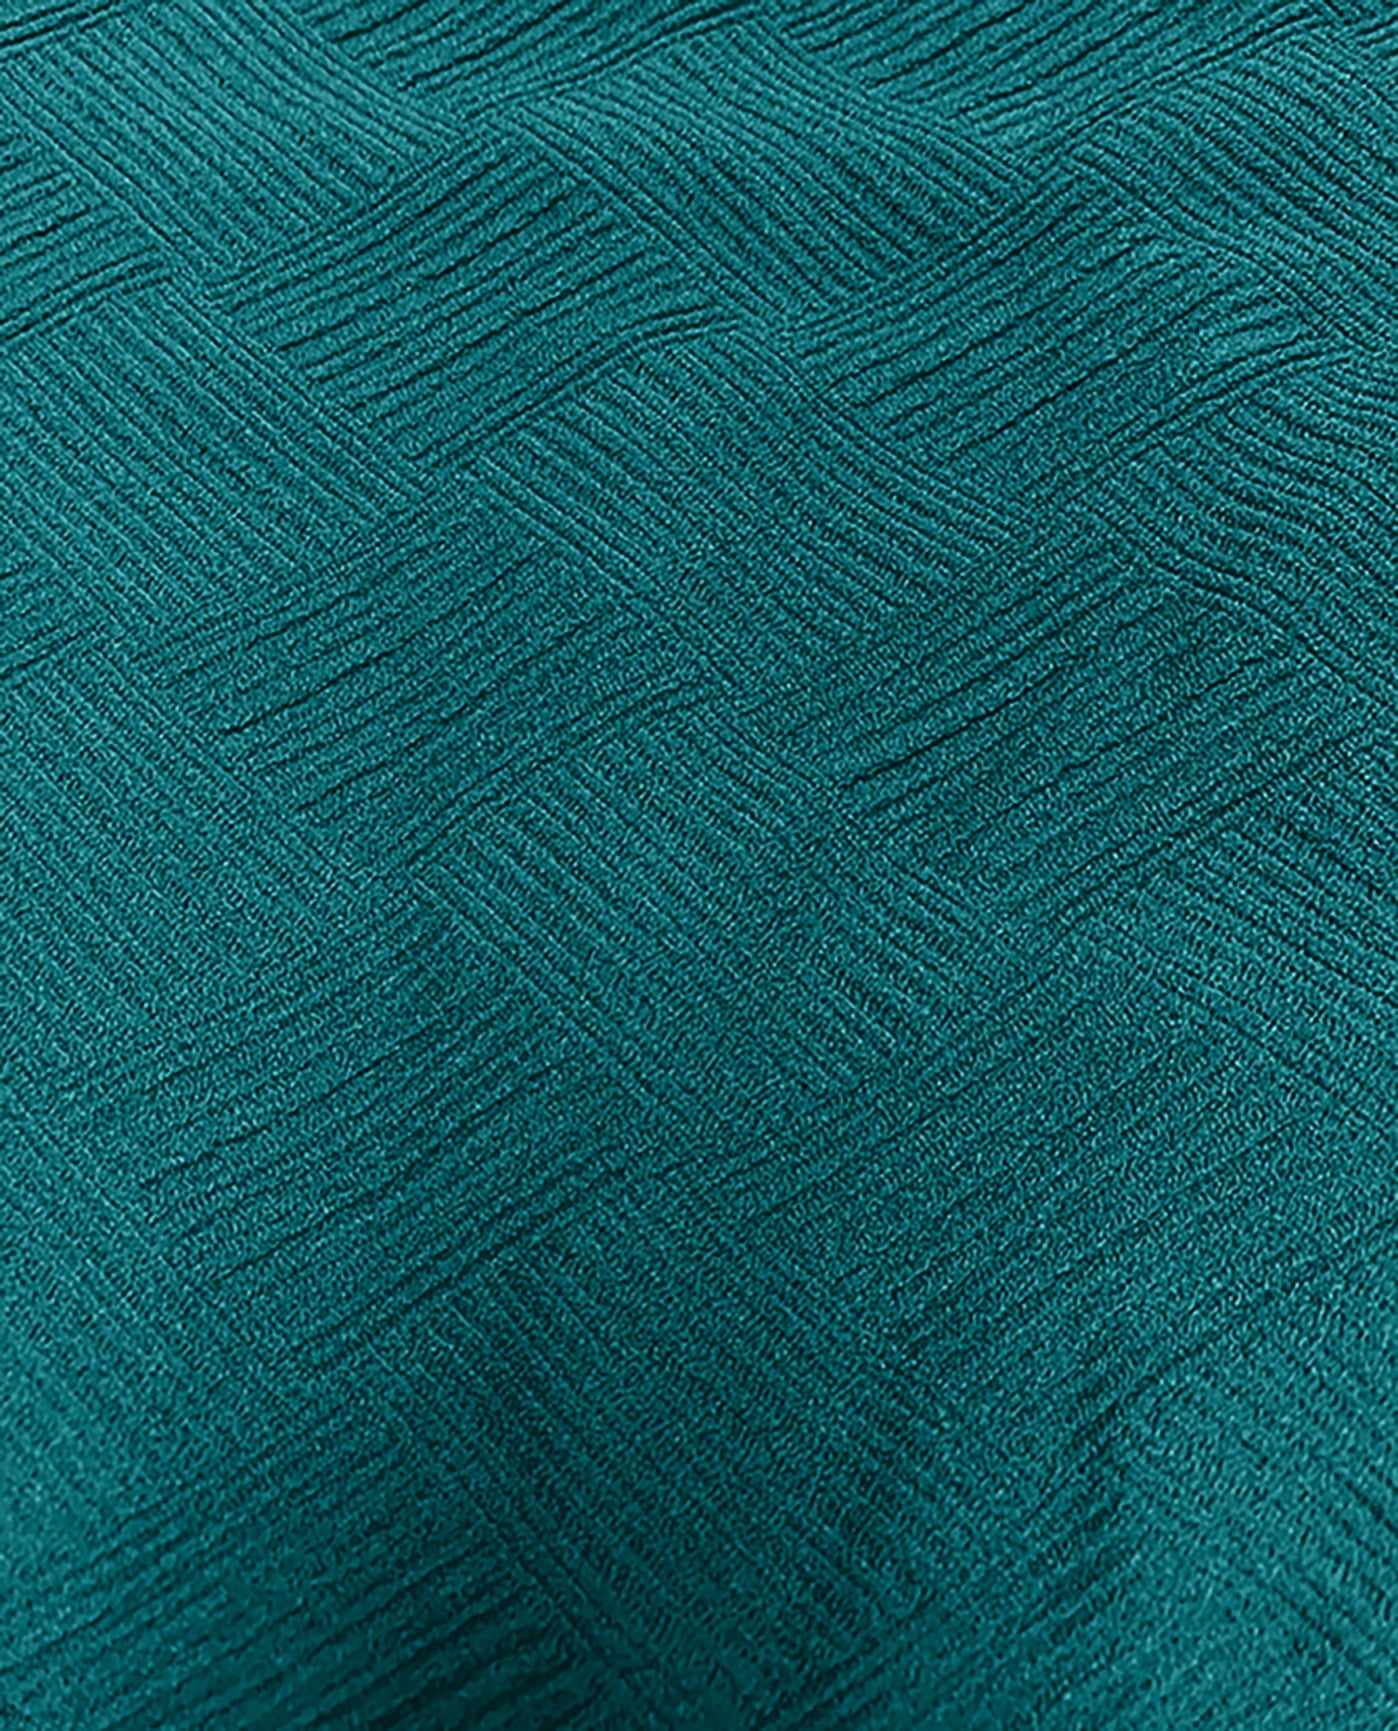 FABRIC SWATCH VIEW OF CHLORINE RESISTANT AQUAMORE SOLID SIGNATURE TEXTURED HIGH NECK ONE PIECE SWIMSUIT | 010 AQS SIGNATURE DEEP OCEAN